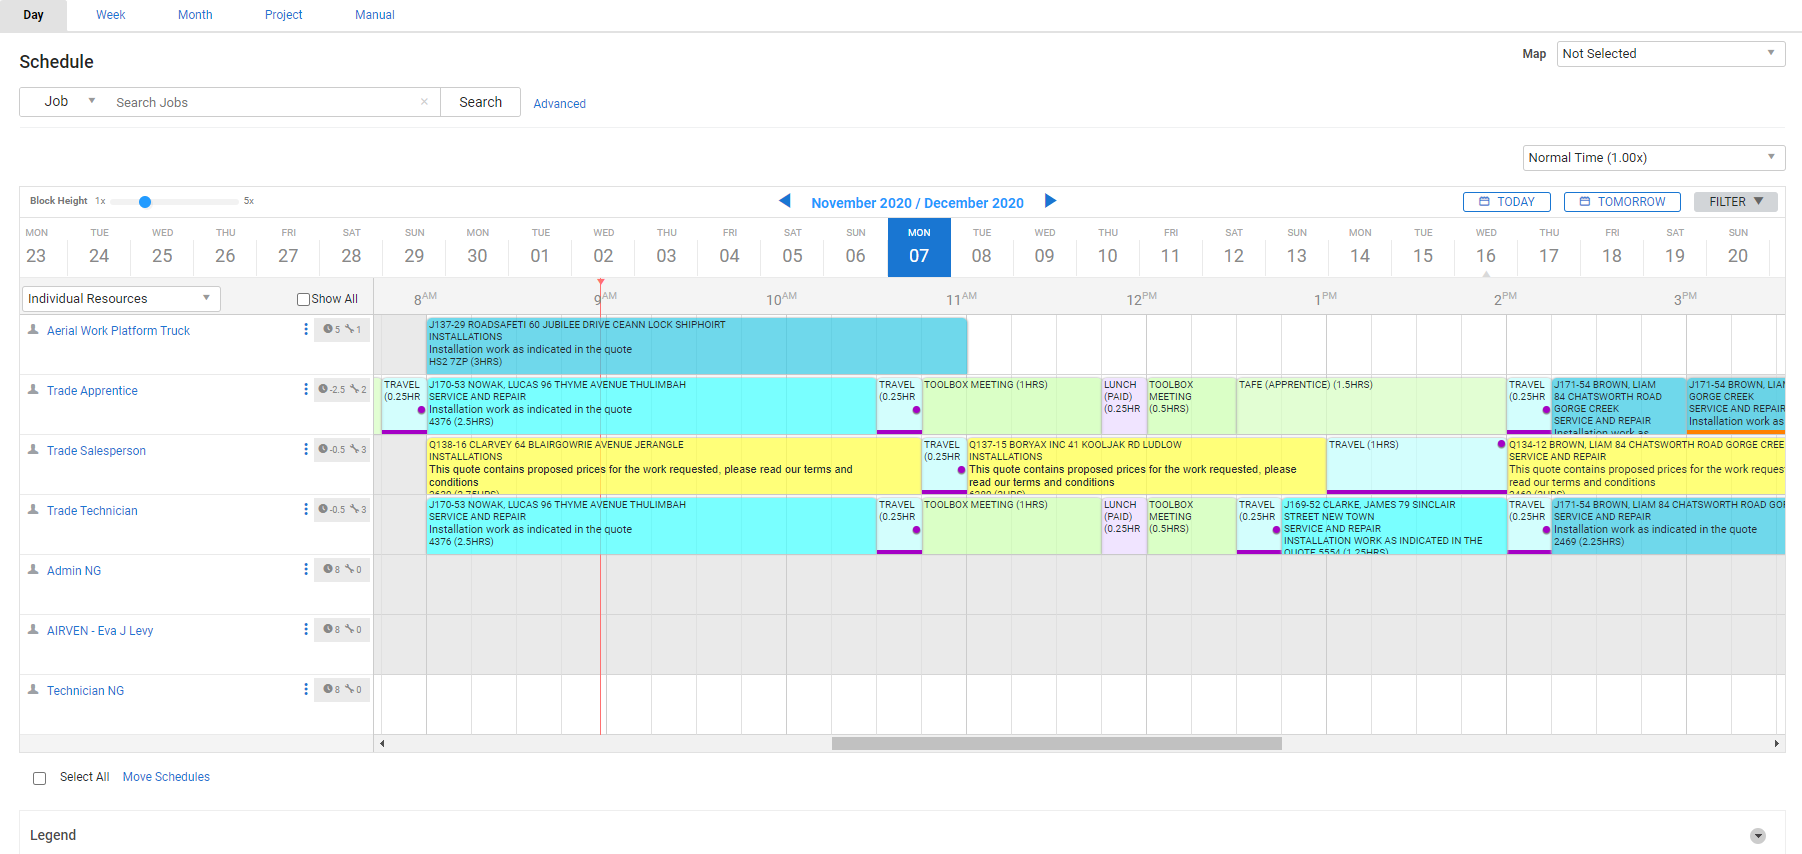 A screenshot of a project scheduled in Day View.